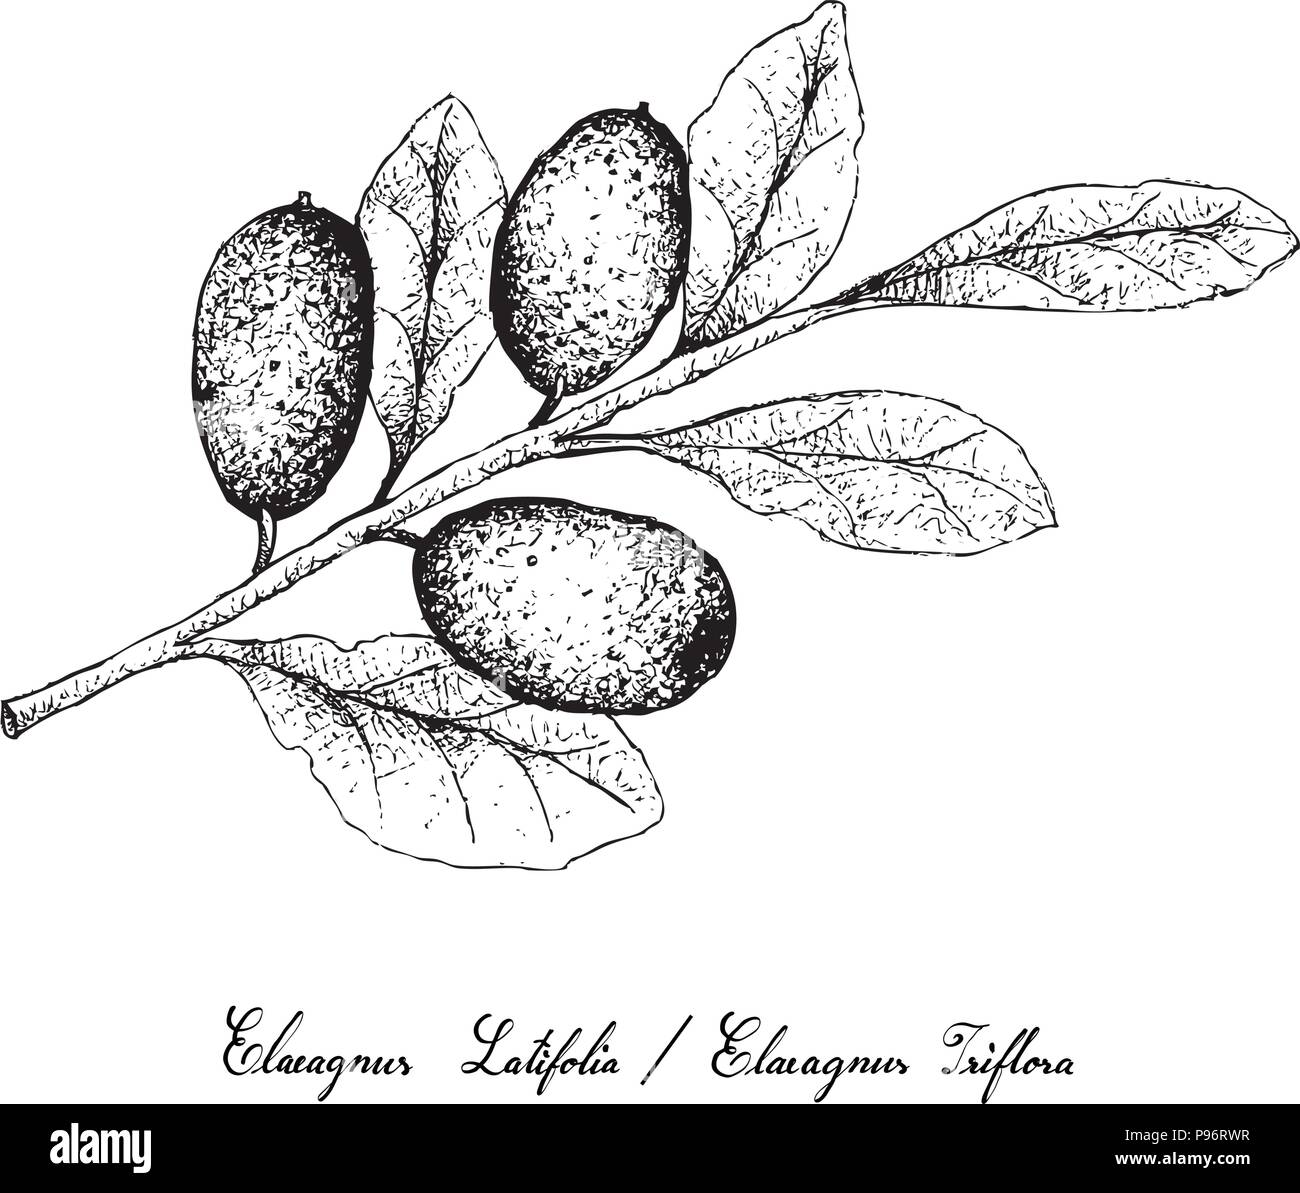 Tropical Fruits, Illustration of Hand Drawn Sketch Fresh Elaeagnus Ebbingei, Oleaster or Ebbings Silverberry Fruits Isolated on White Background. Stock Vector